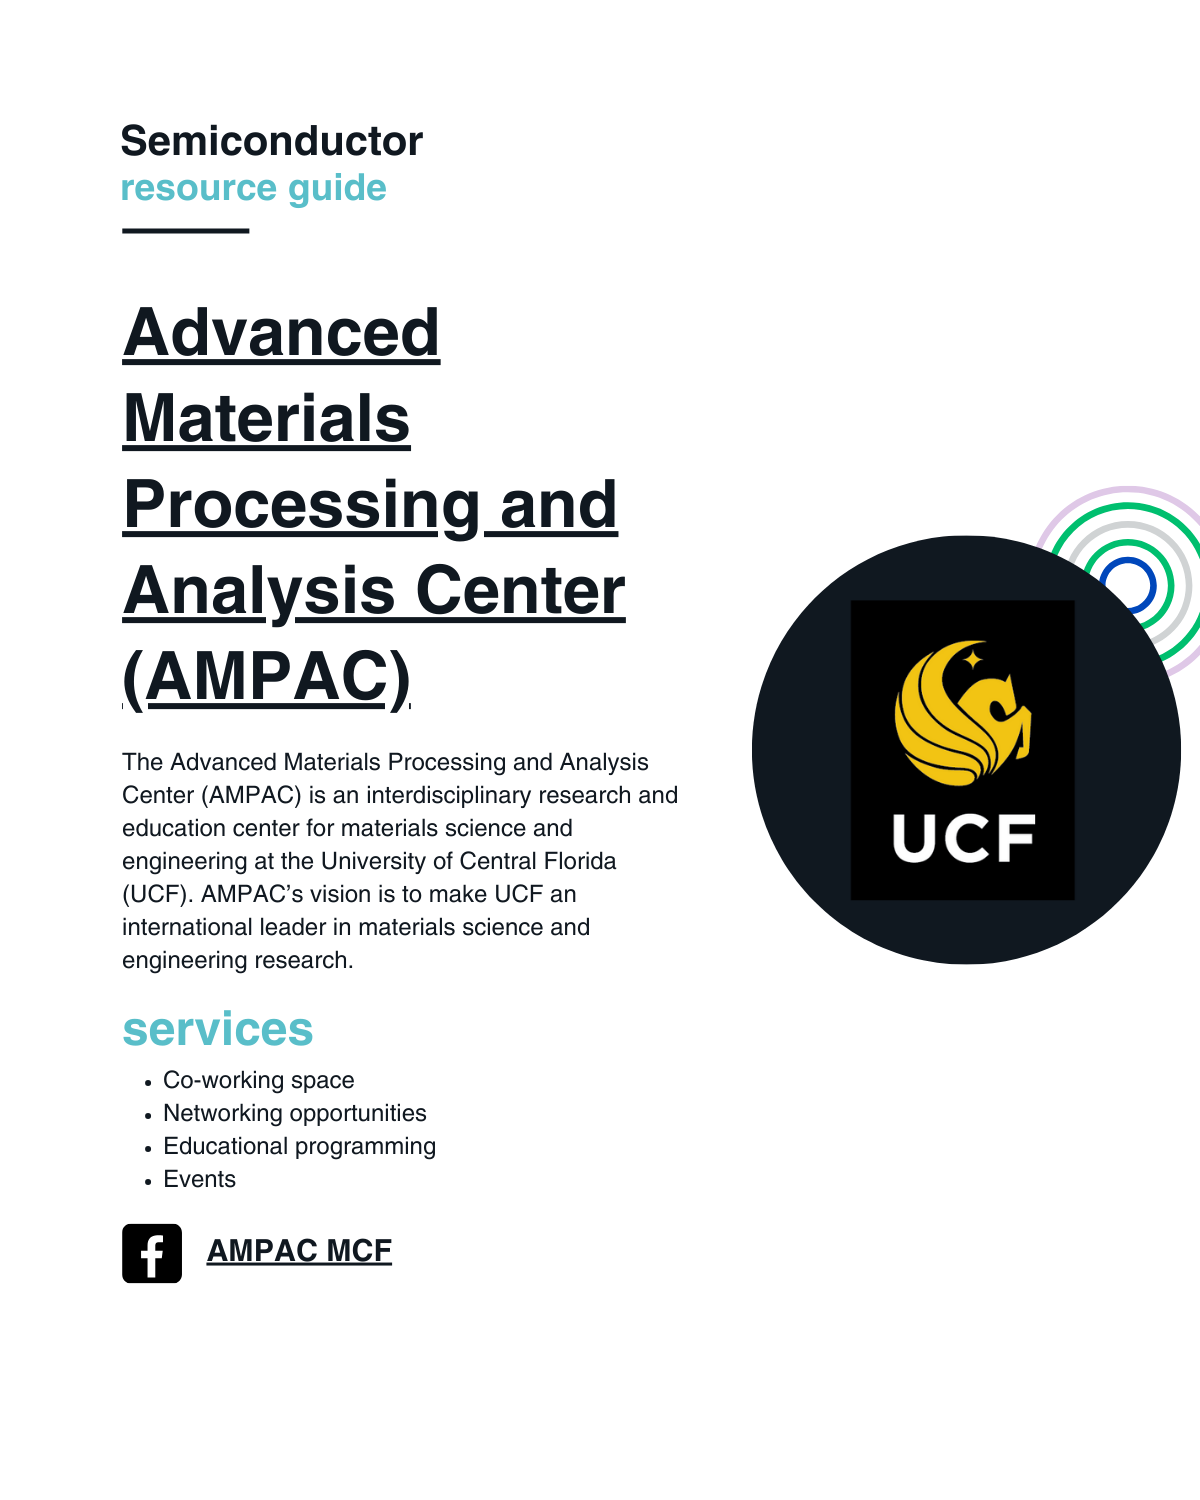 The Advanced Materials Processing and Analysis Center (AMPAC) is an interdisciplinary research and education center for materials science and engineering at the University of Central Florida (UCF). AMPAC’s vision is to make UCF an international leader in materials science and engineering research.